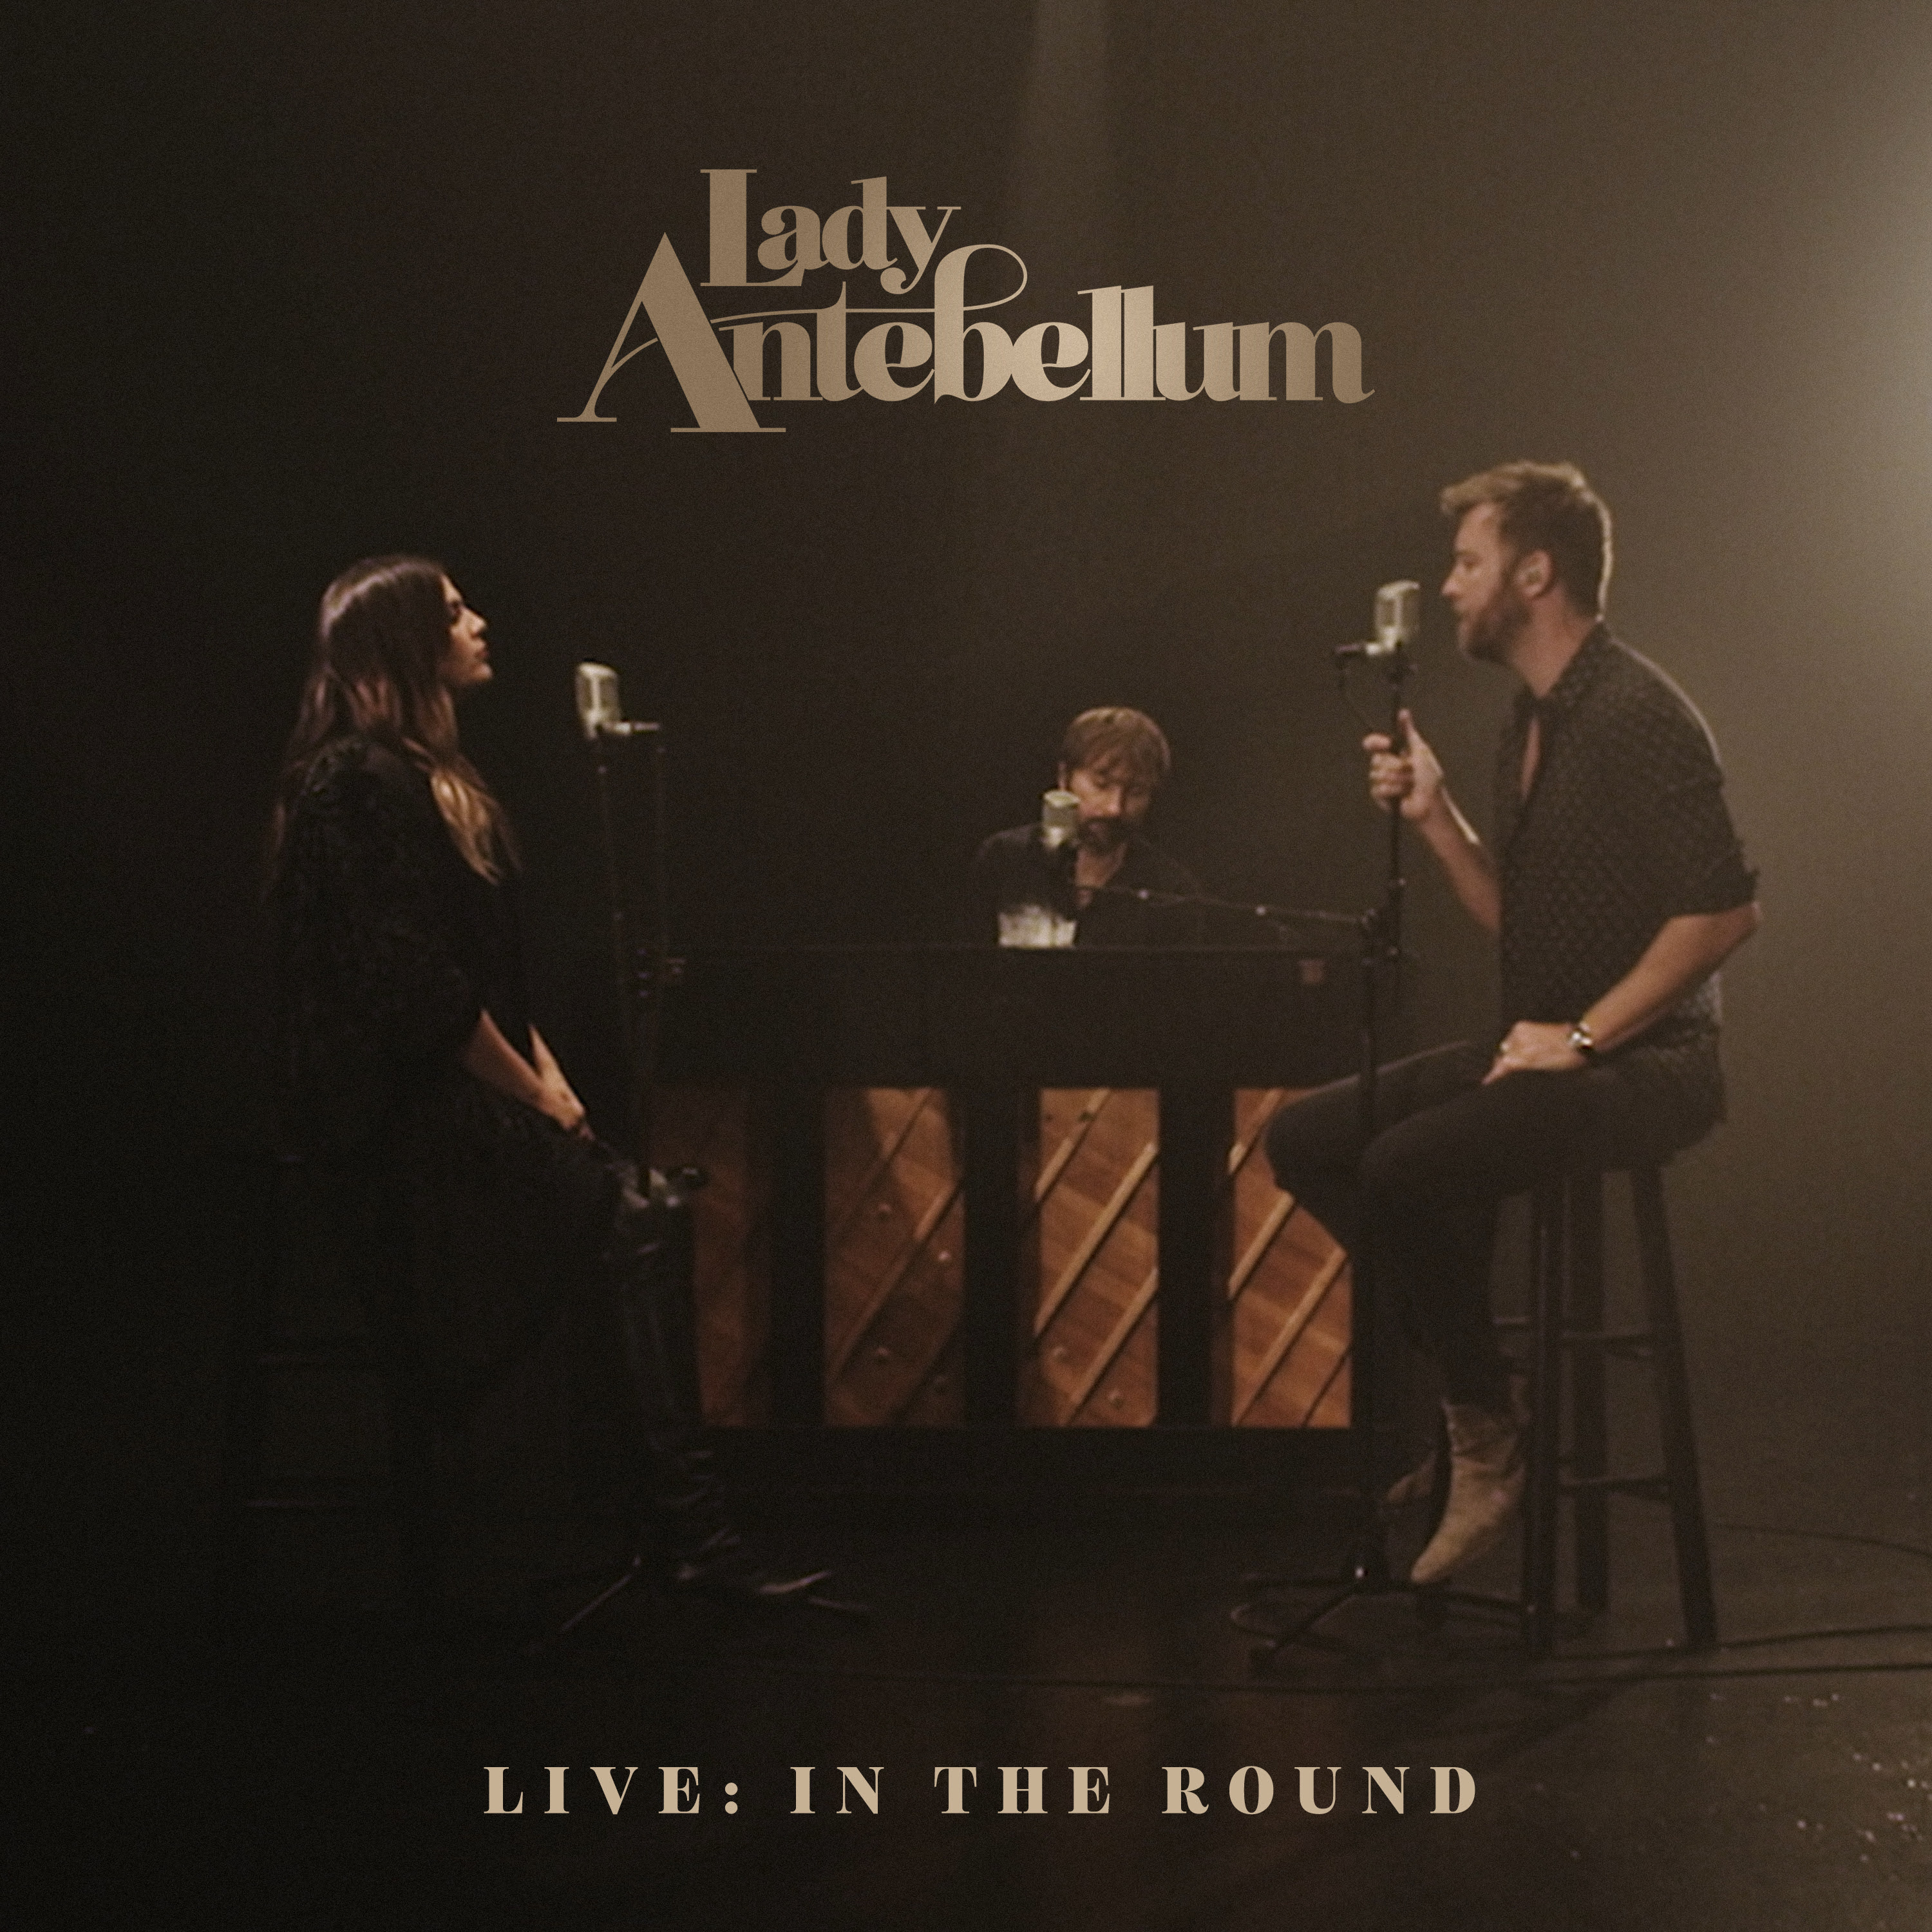 New Music Friday: Lady Antebellum, Hot Country Knights and Lauren Alaina Drop New Songs